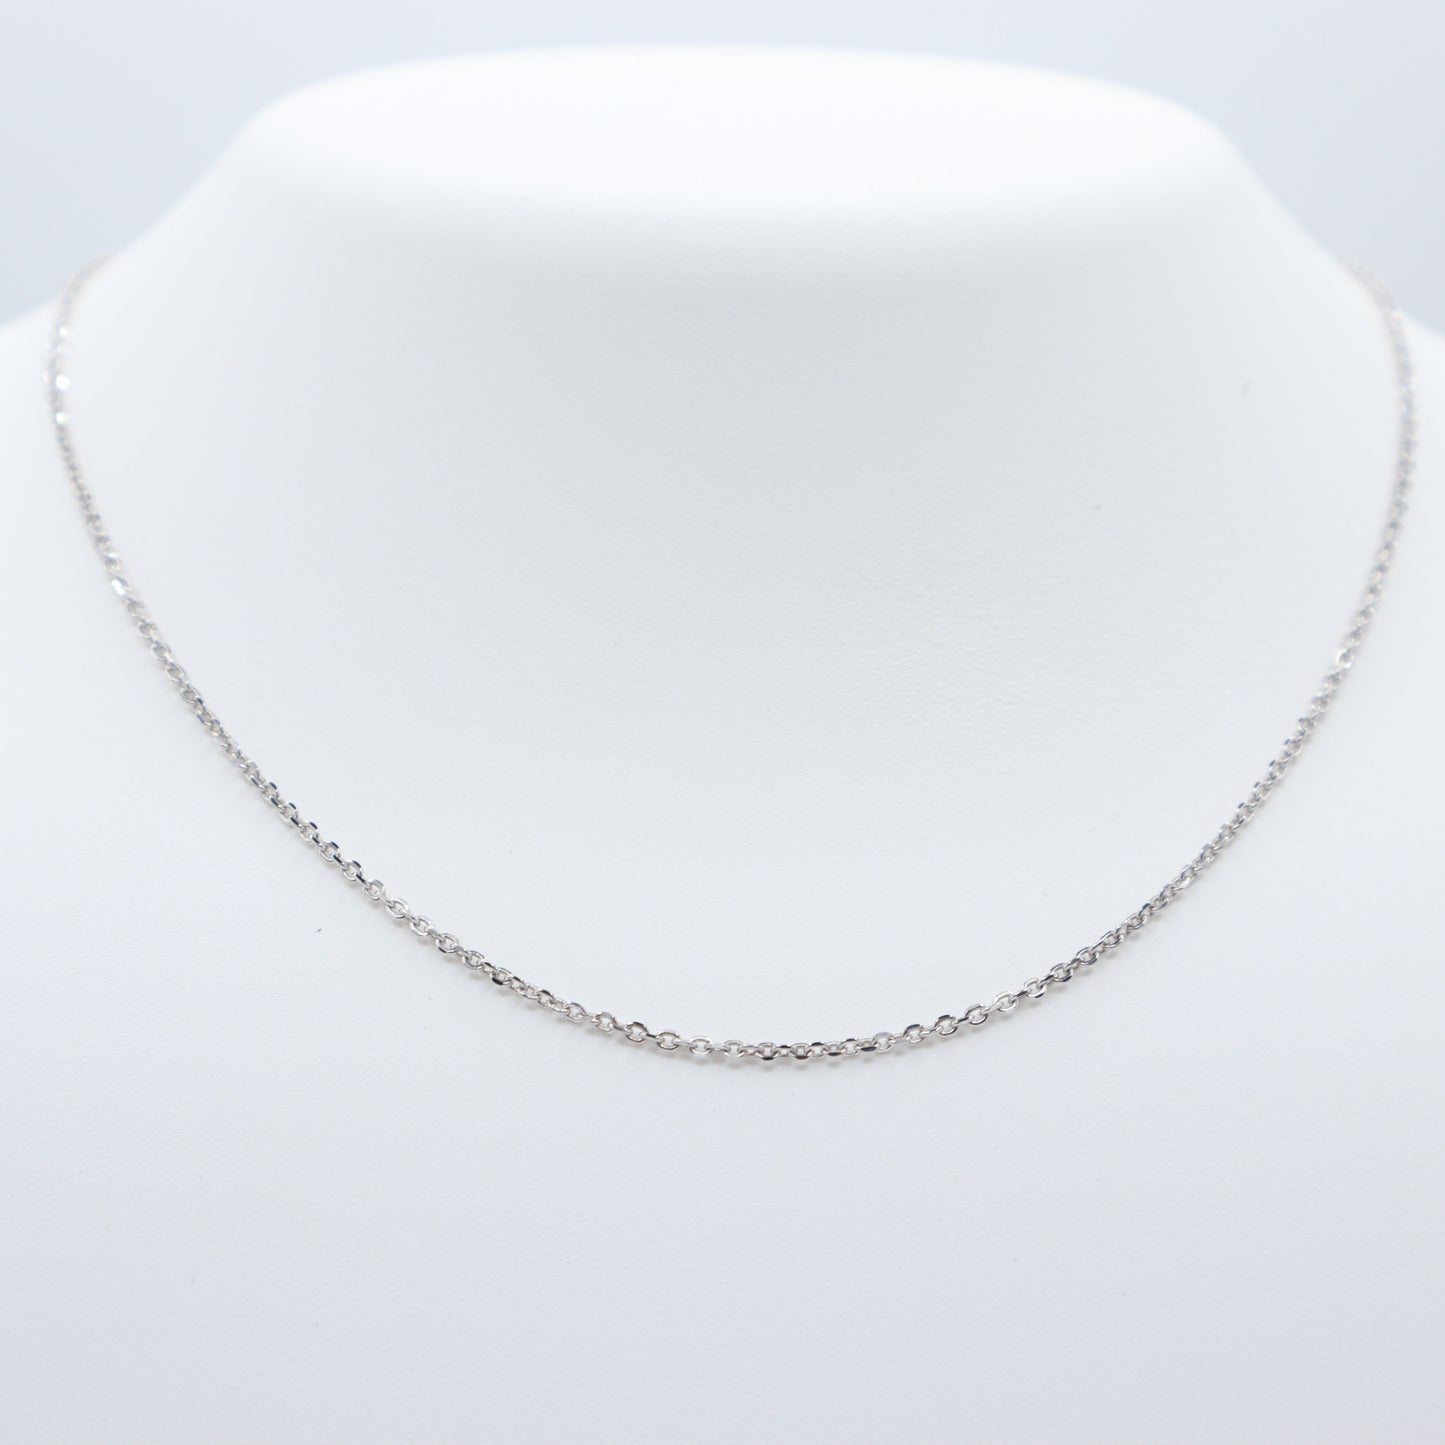 White Gold Cable Chain 16"